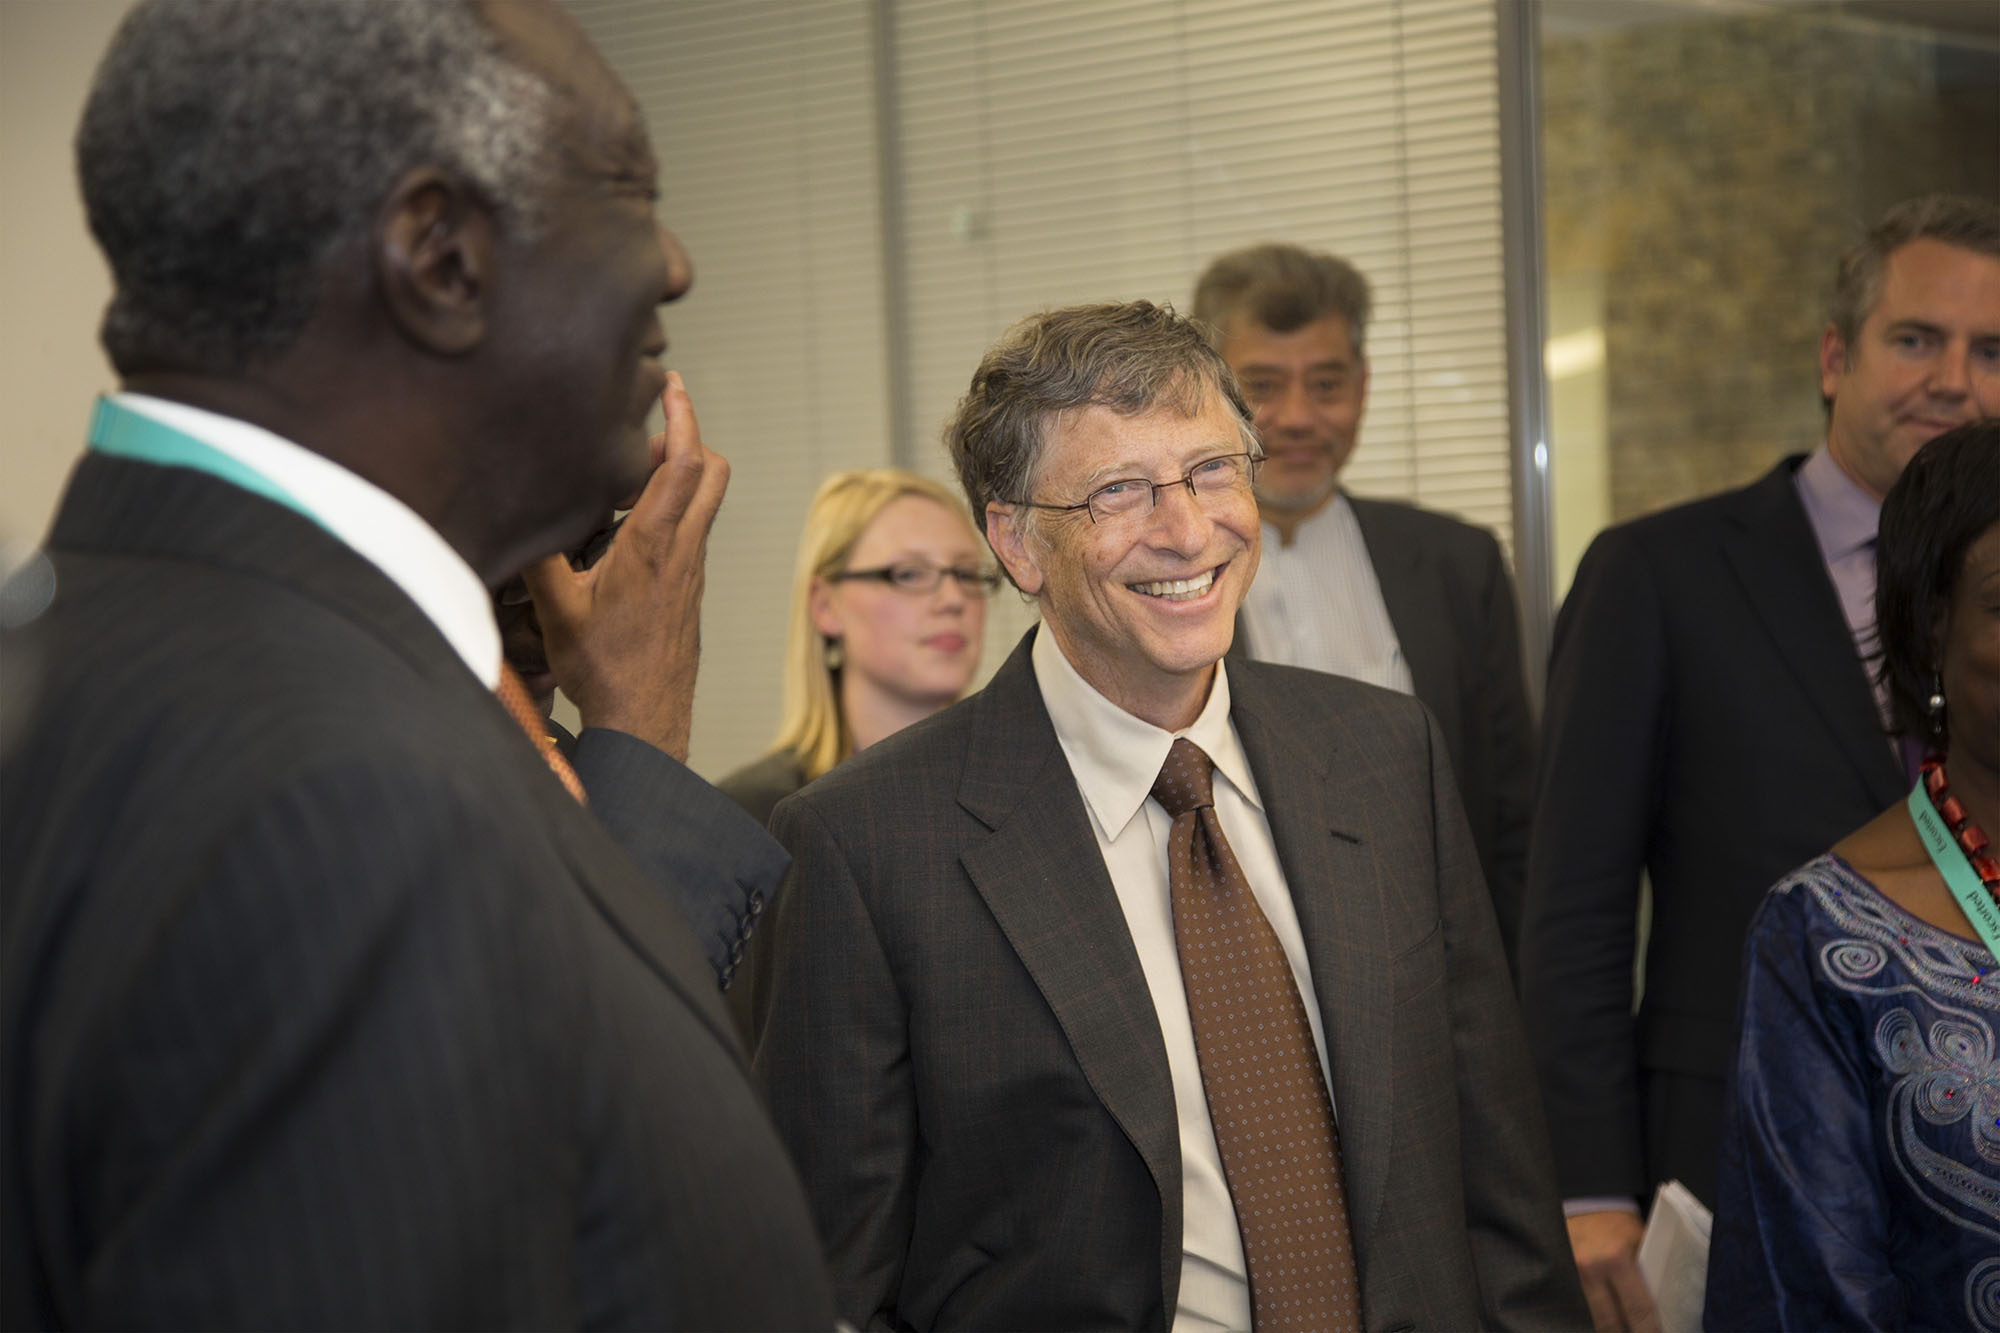  Bill Gates visiting DfID in London during a summit on World nutrition.&nbsp; For the Bill &amp; Melinda Gates Foundation.  